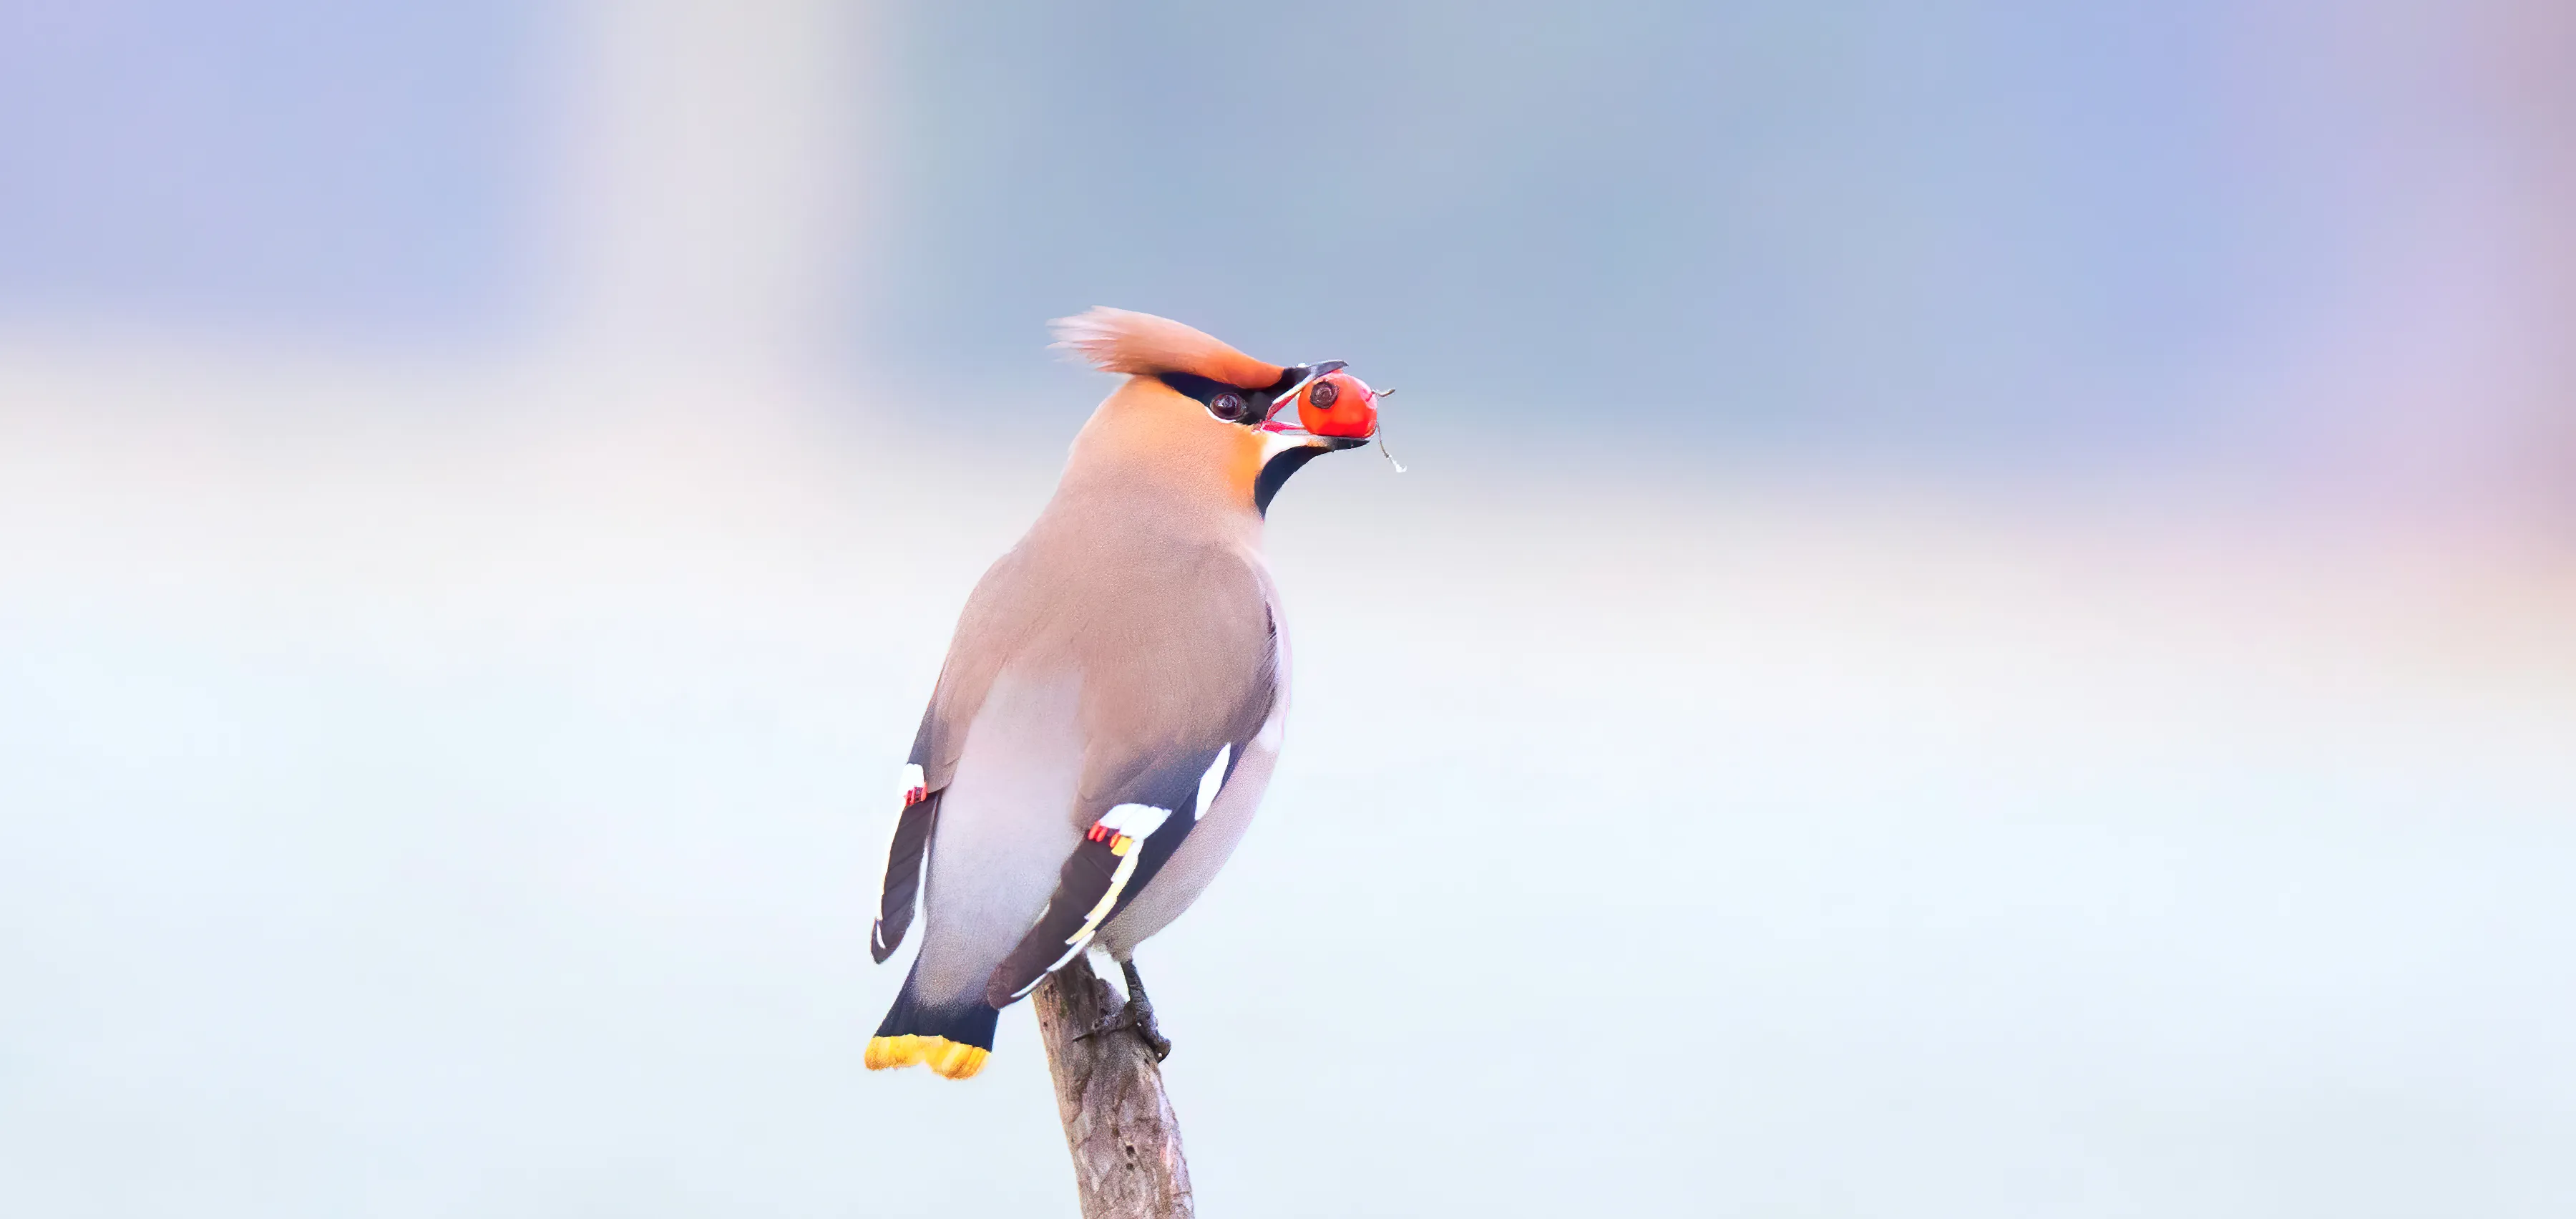 A Waxwing perched on branch with a red berry in their beak with a snowy background.